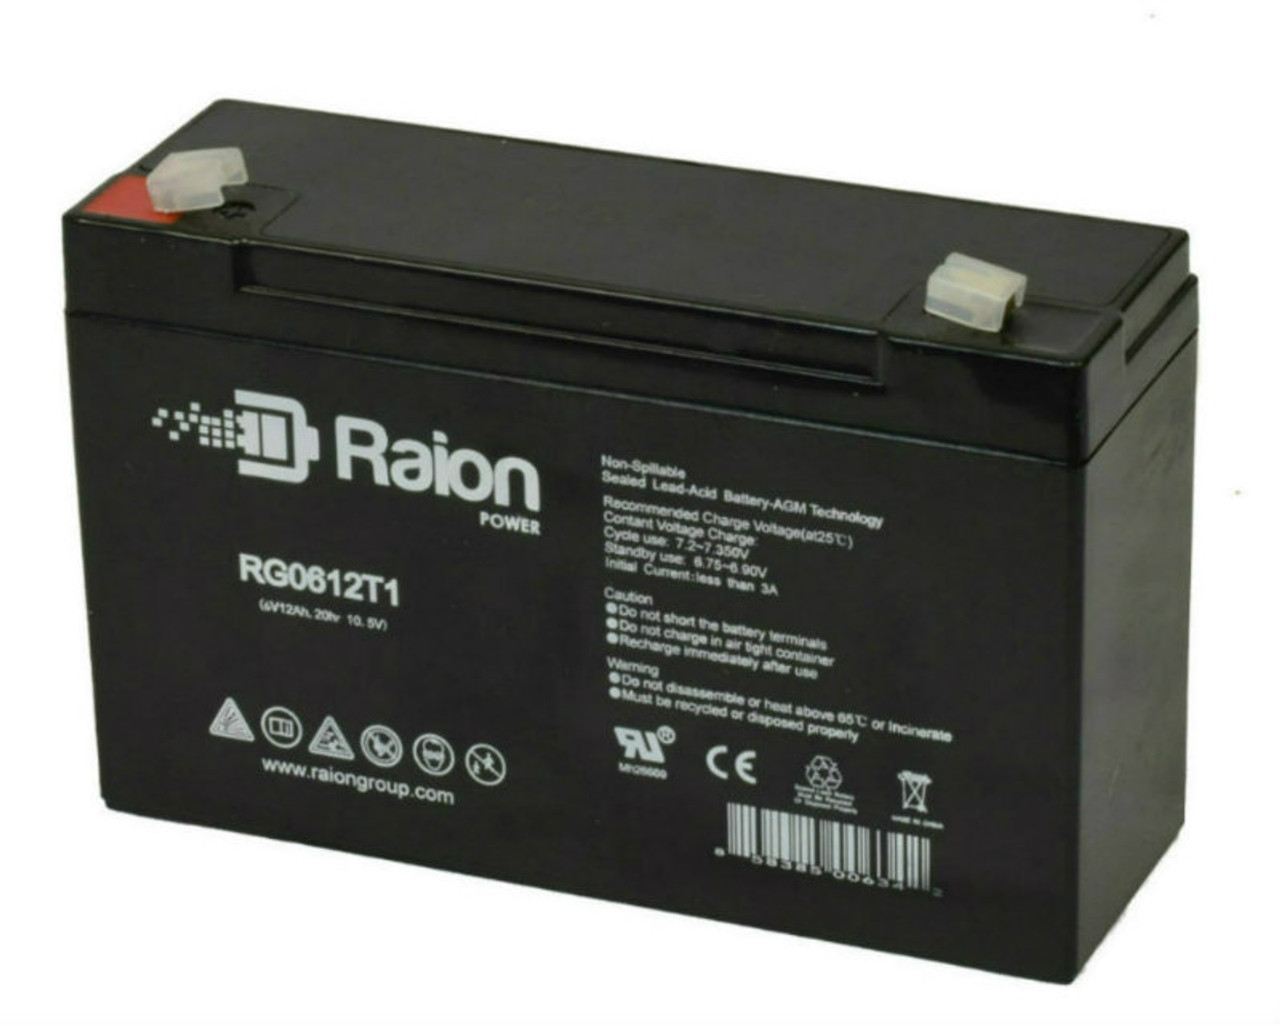 Raion Power RG06120T1 Replacement Battery for Canbat CBL12-6